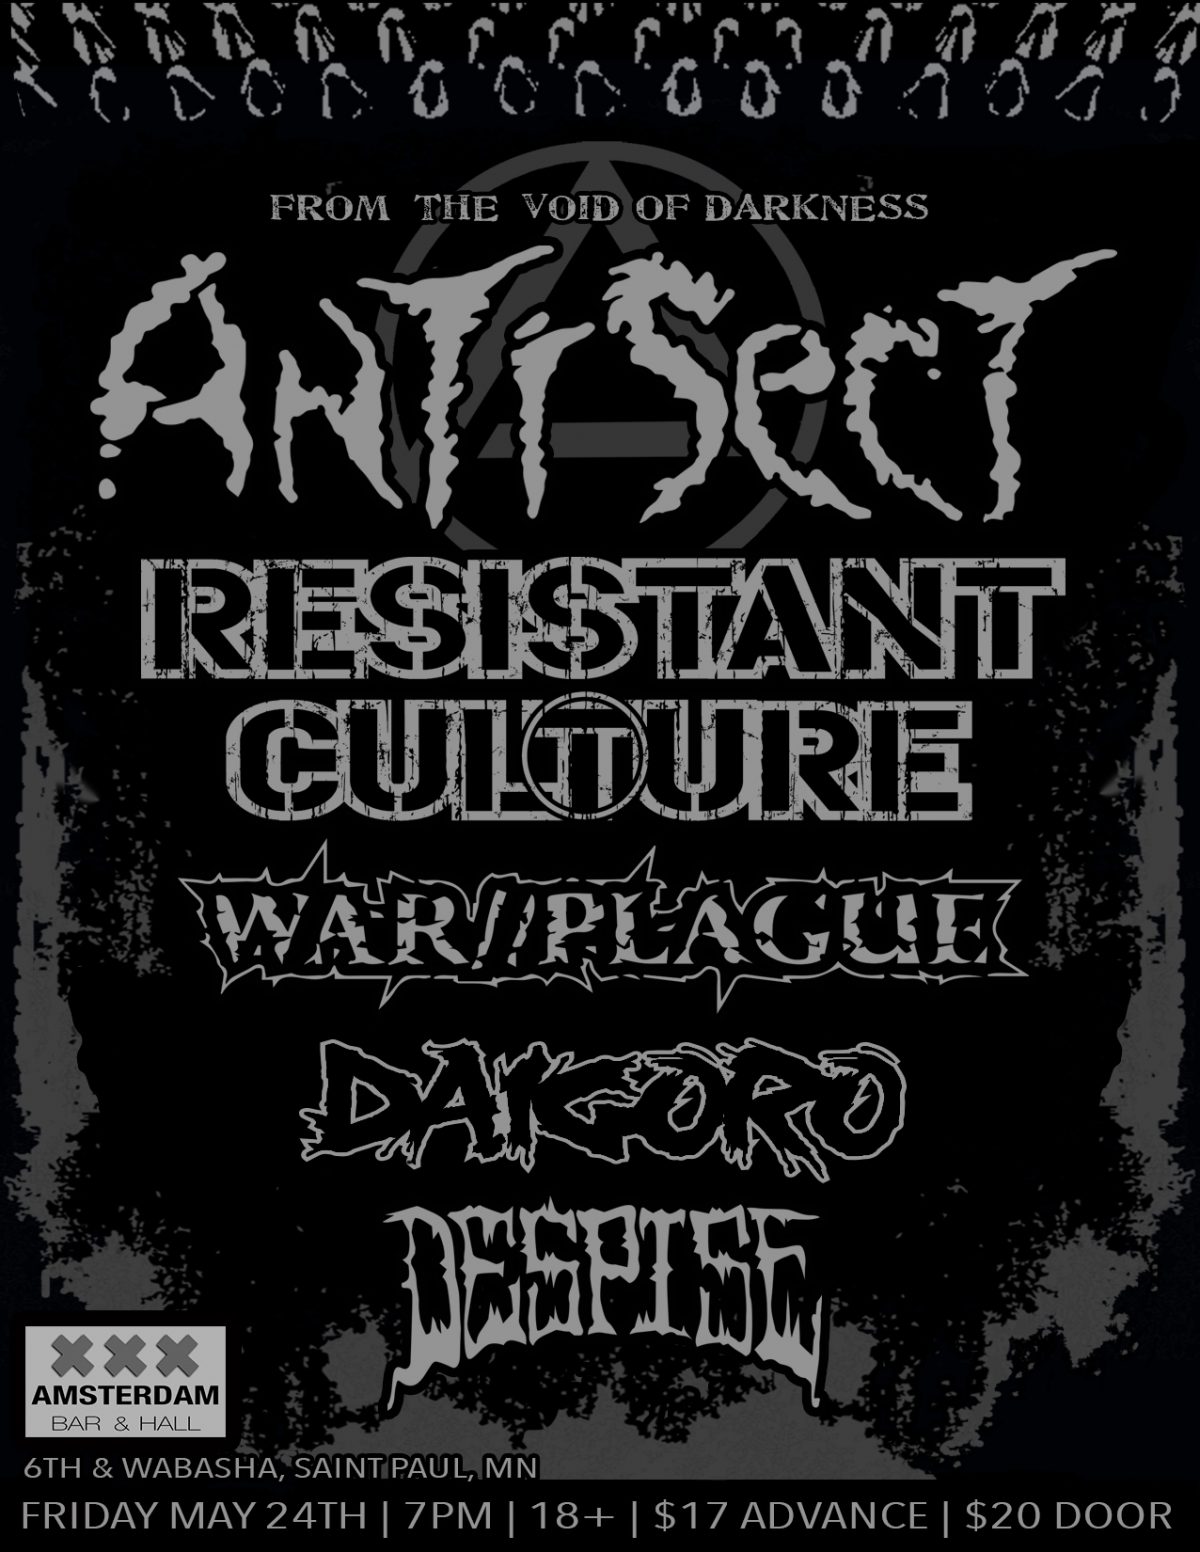 antisect in darkness there is no choice rar